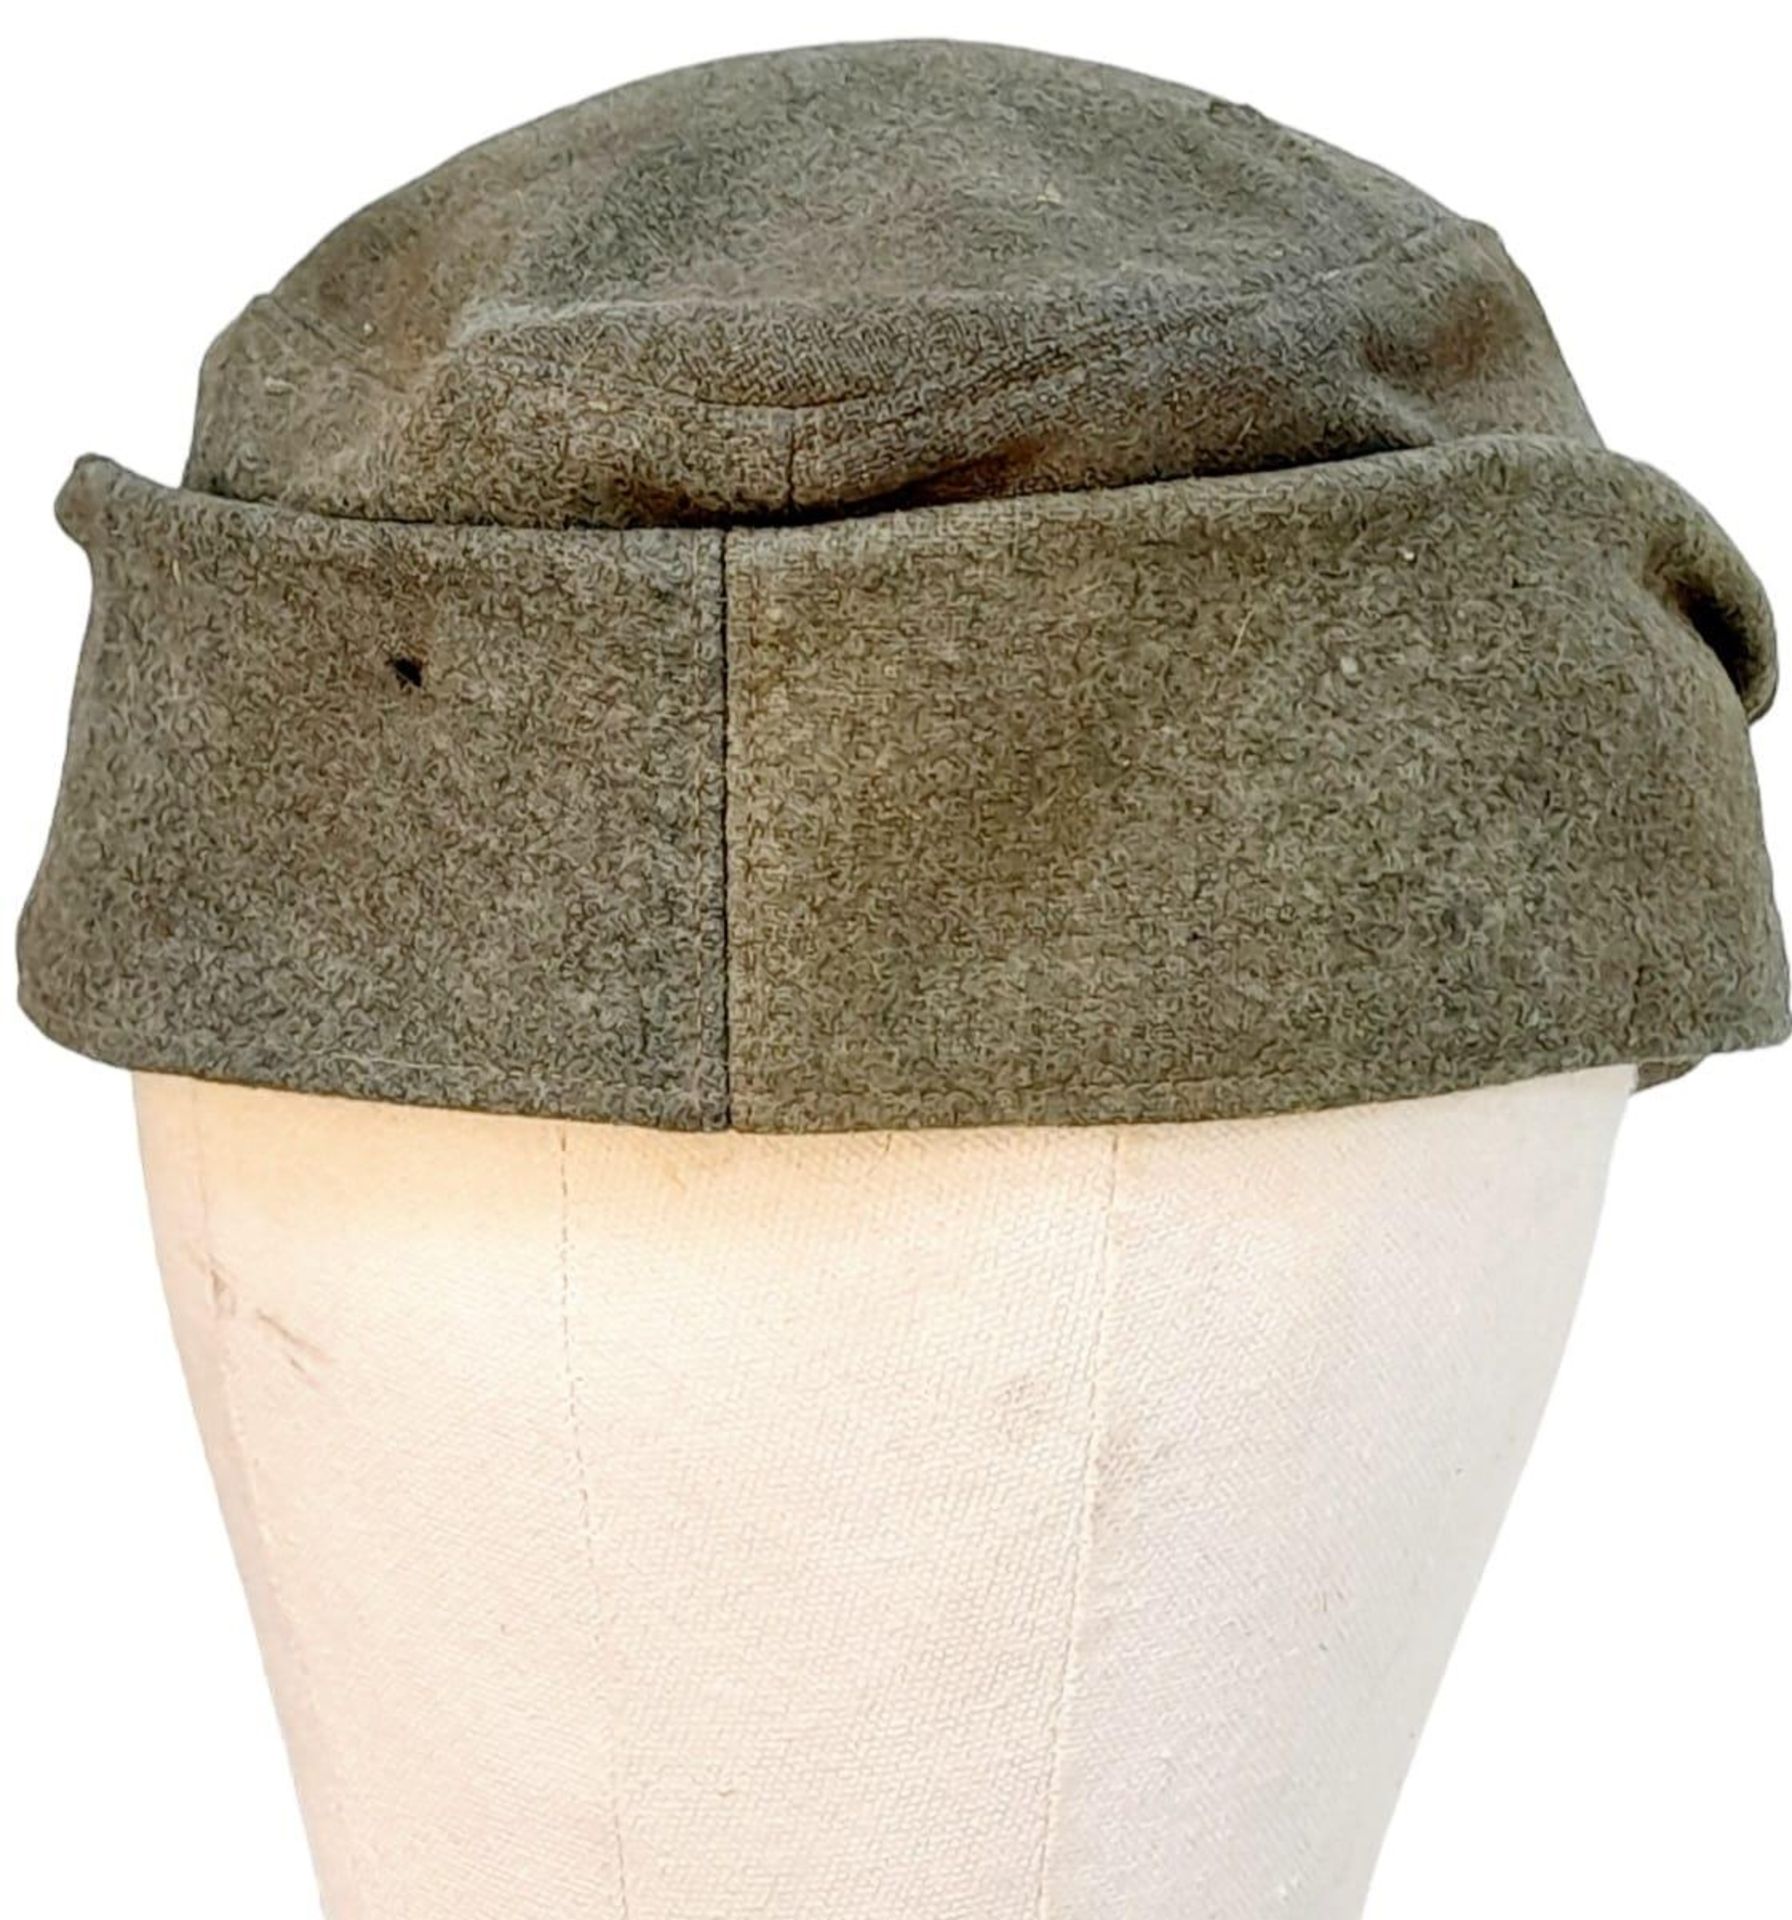 3rd Reich Waffen SS M43 Cap. very small cut on the top. A real “Been There” item. - Bild 5 aus 5